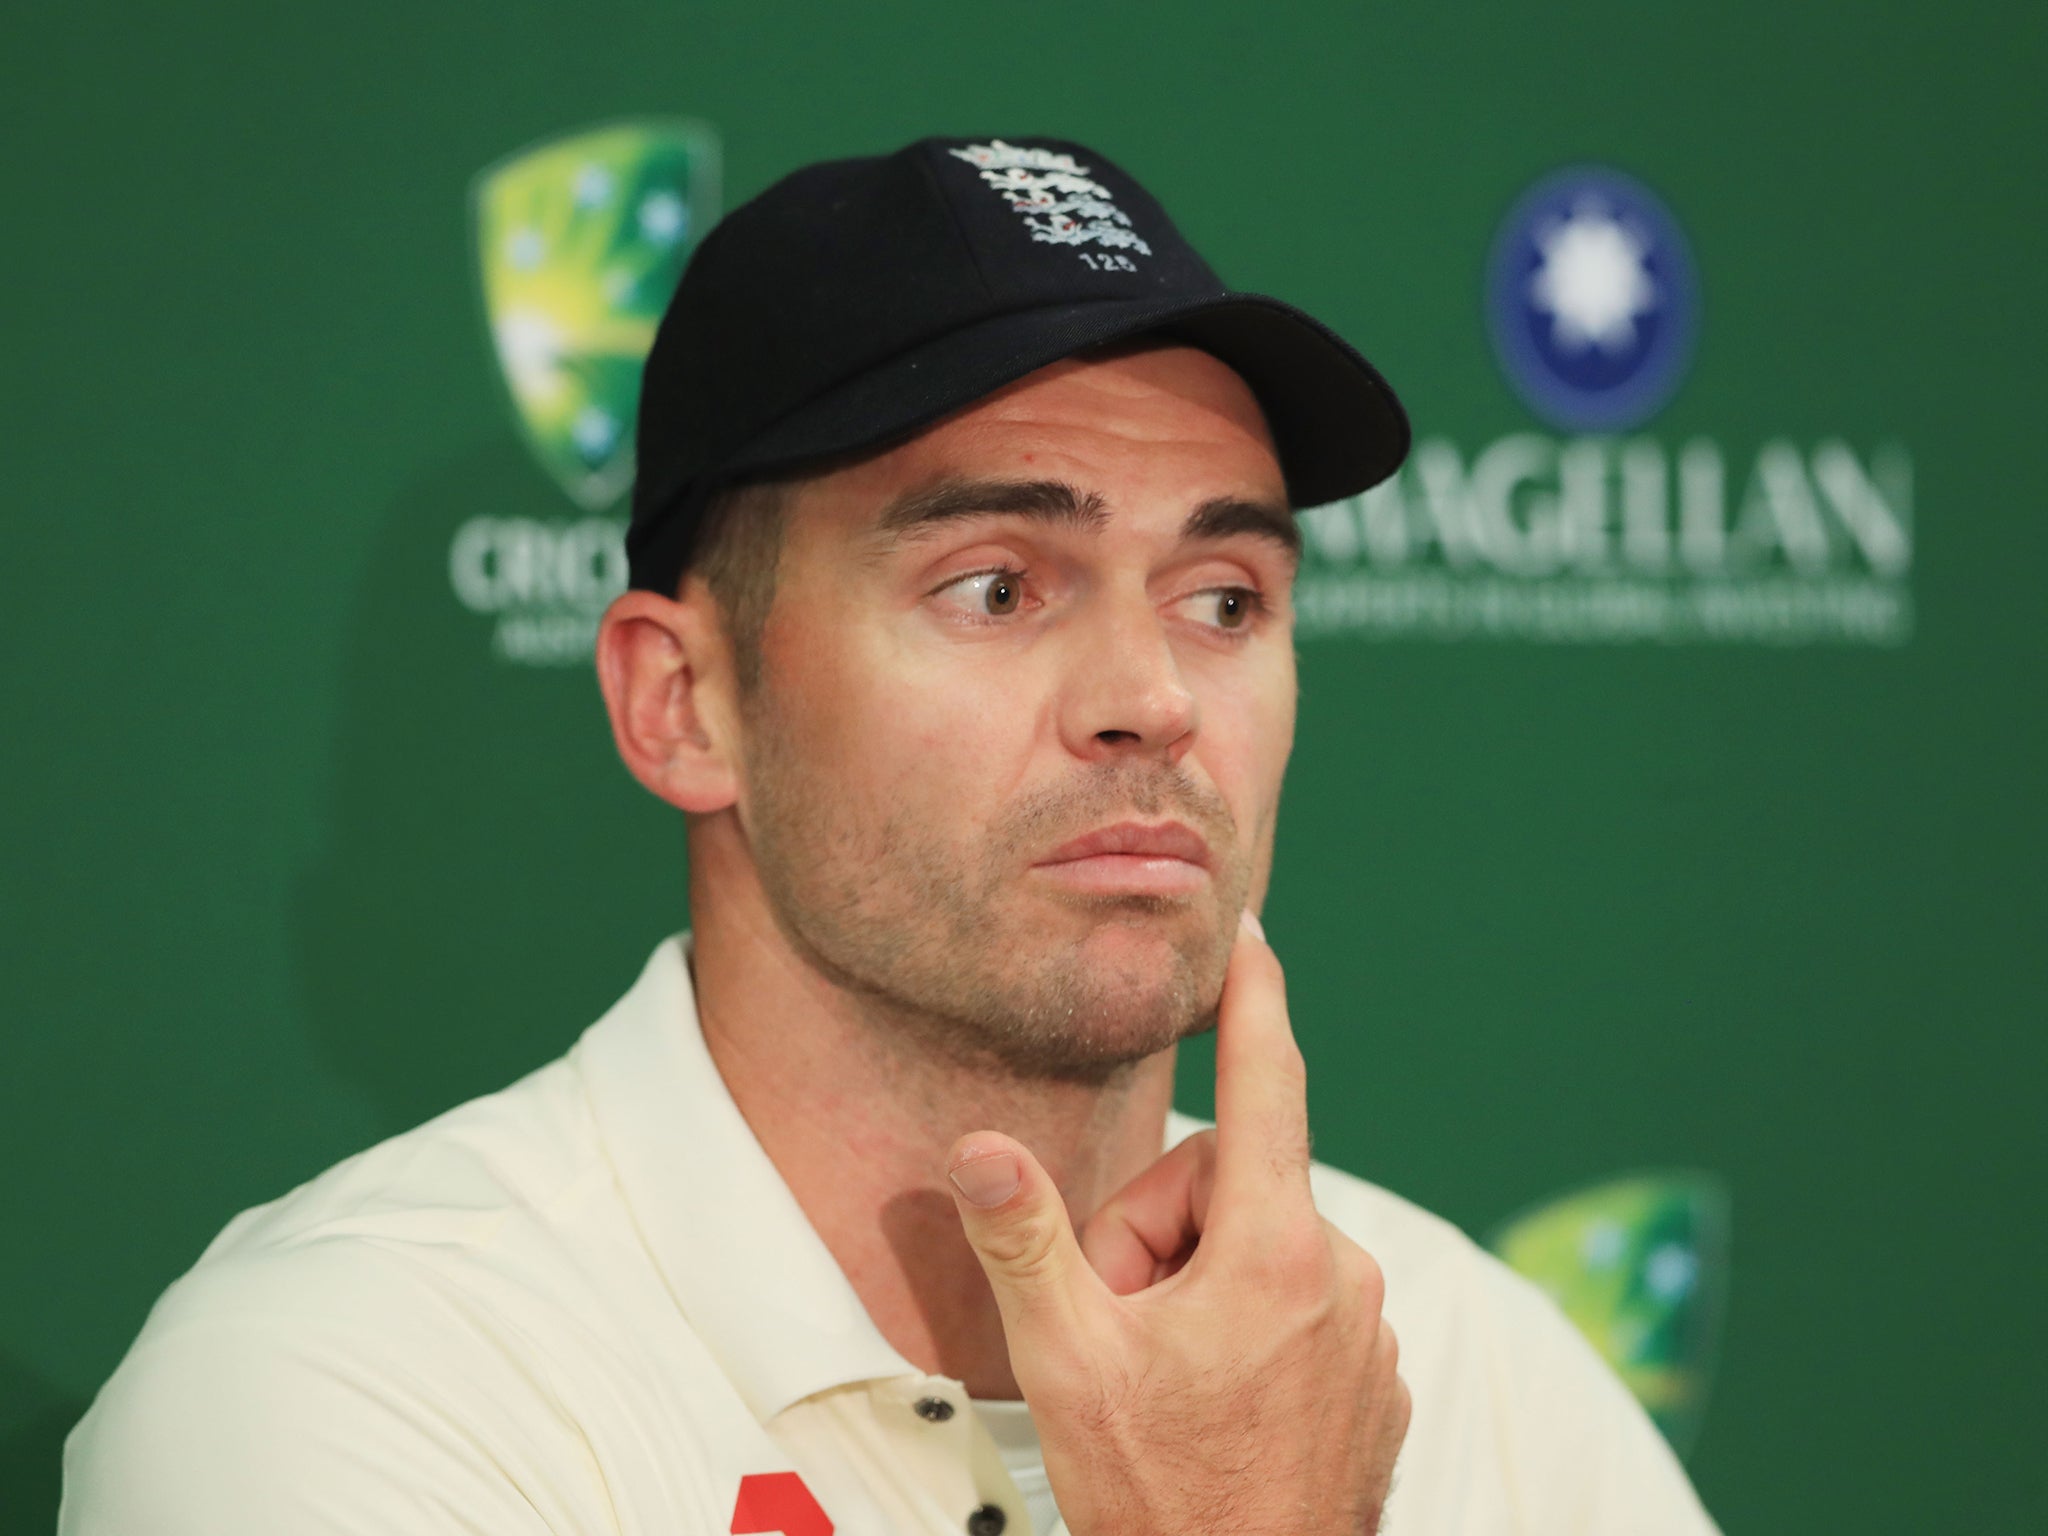 James Anderson plans to use the pain of the 2017/18 defeat to fuel his ambition to play in the 2019 Ashes series